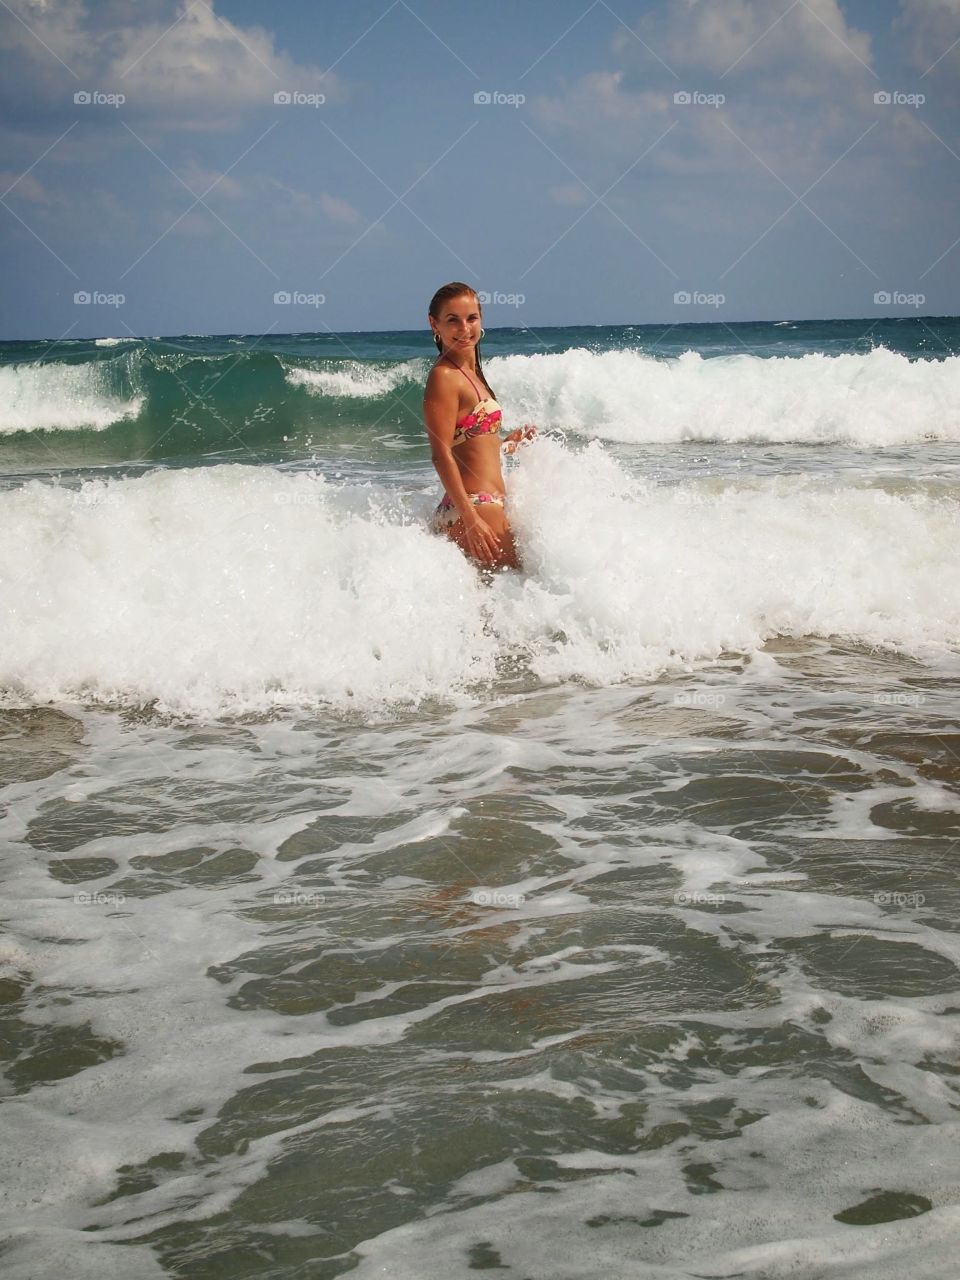 Discovering Crete. Catching waves 